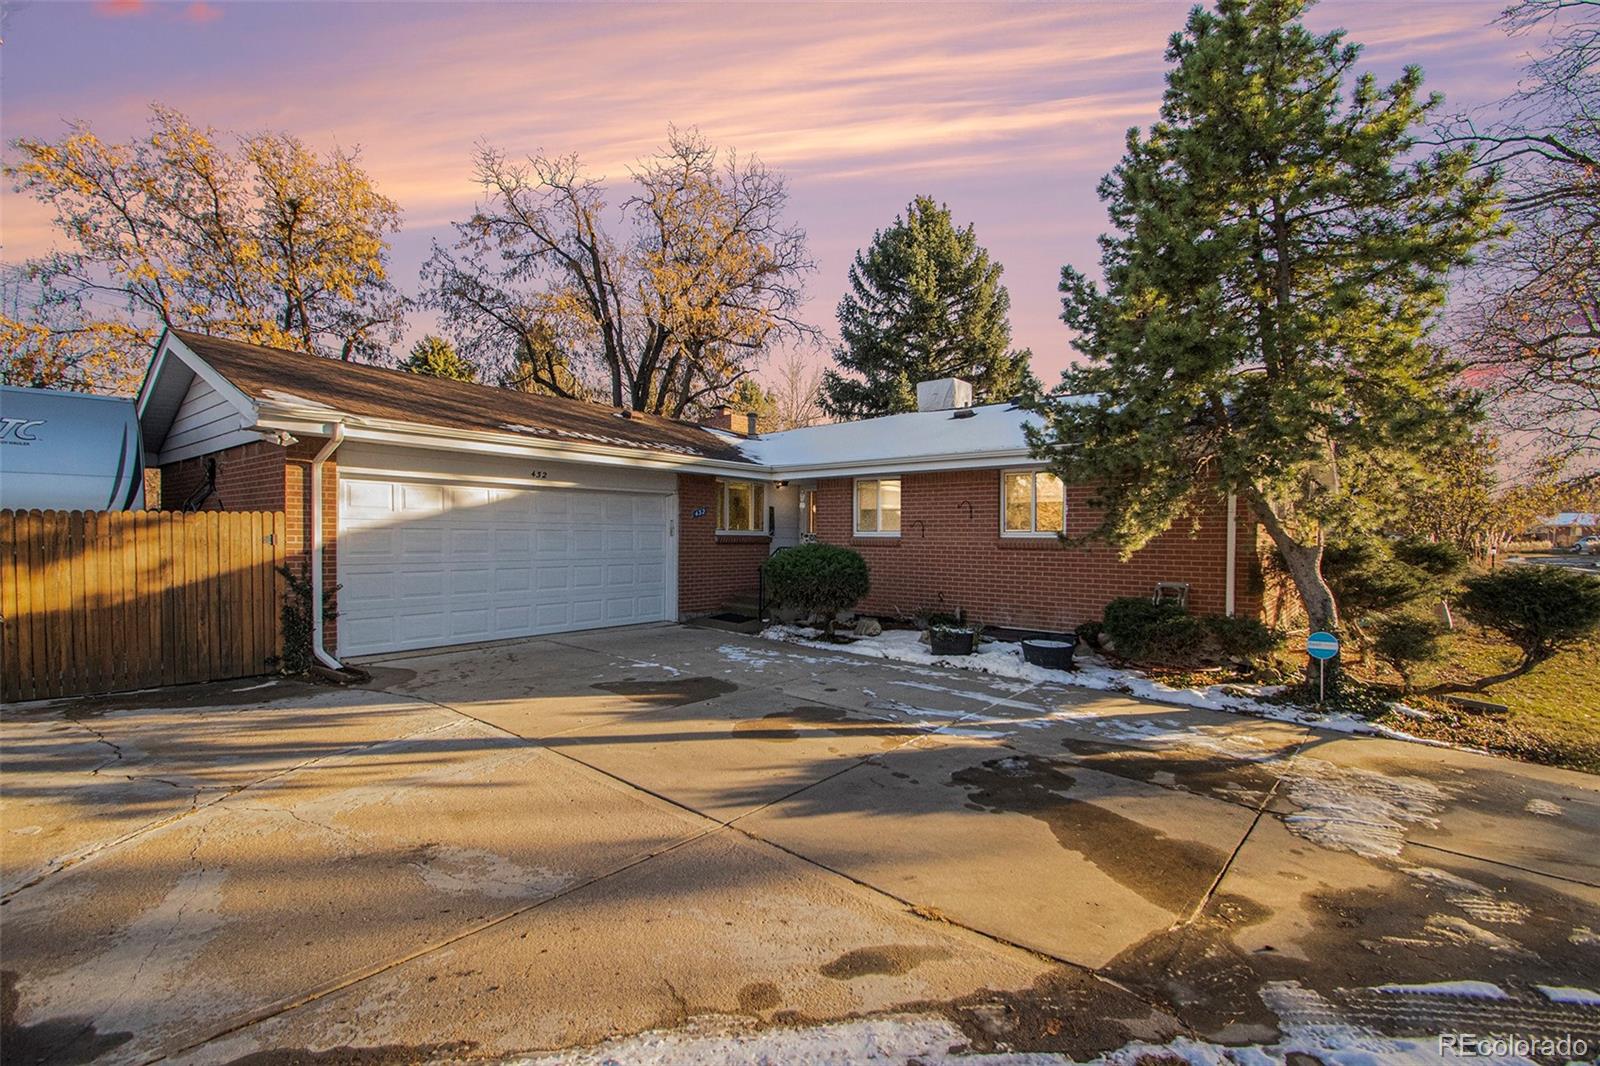 432  lima street, aurora sold home. Closed on 2024-01-12 for $500,000.